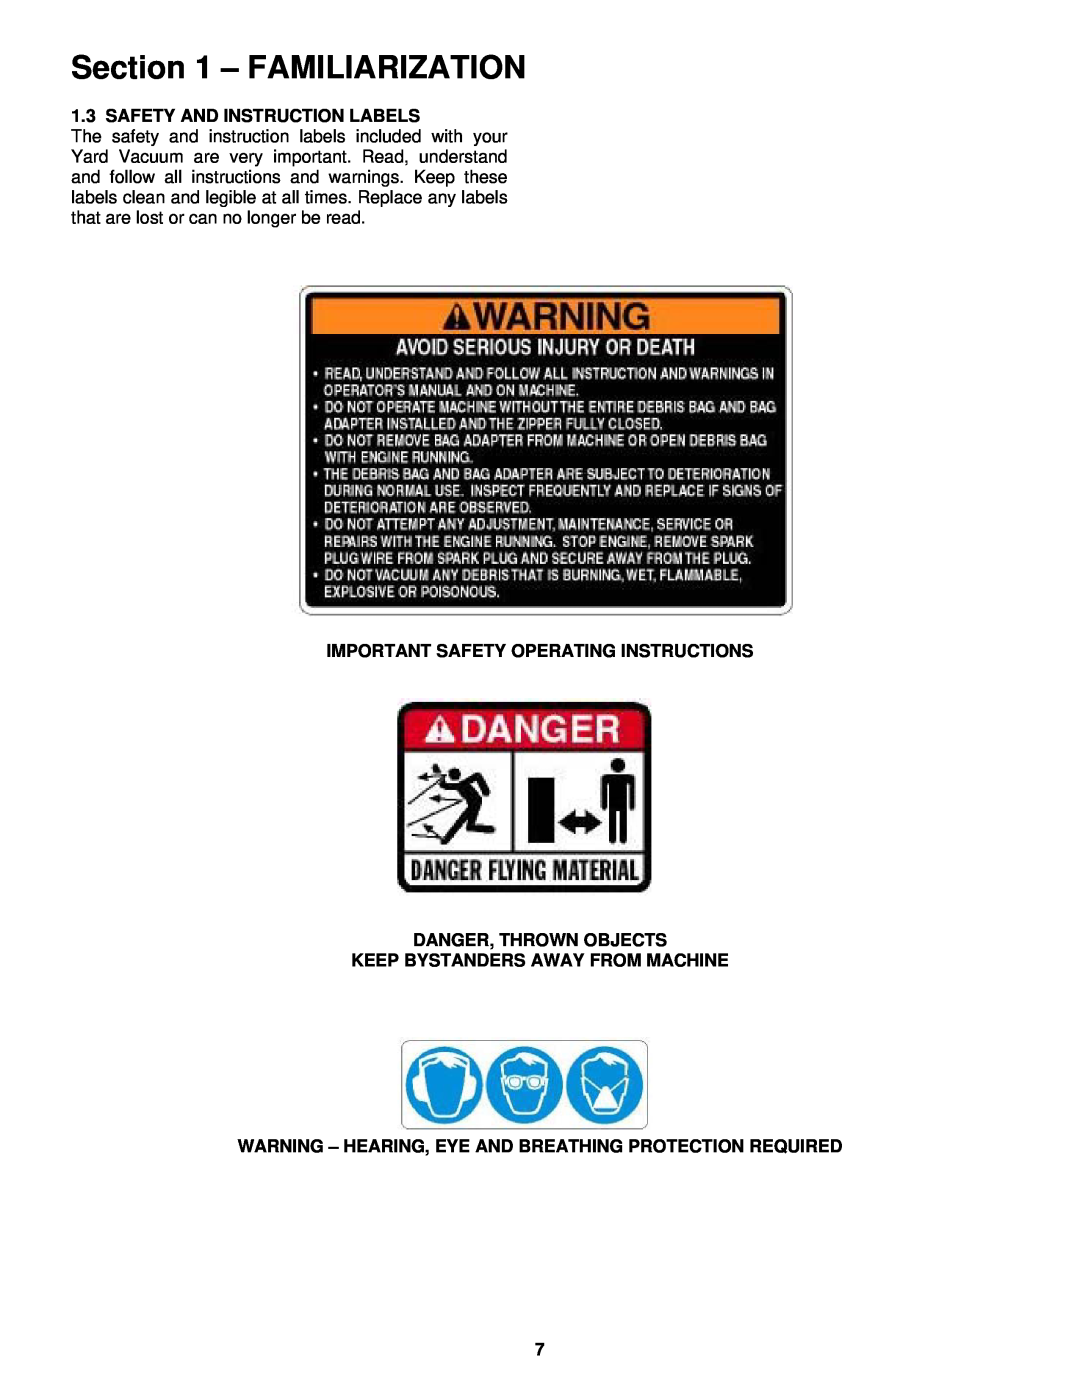 Snapper SV25650B Familiarization, Safety And Instruction Labels, Keep Bystanders Away From Machine 